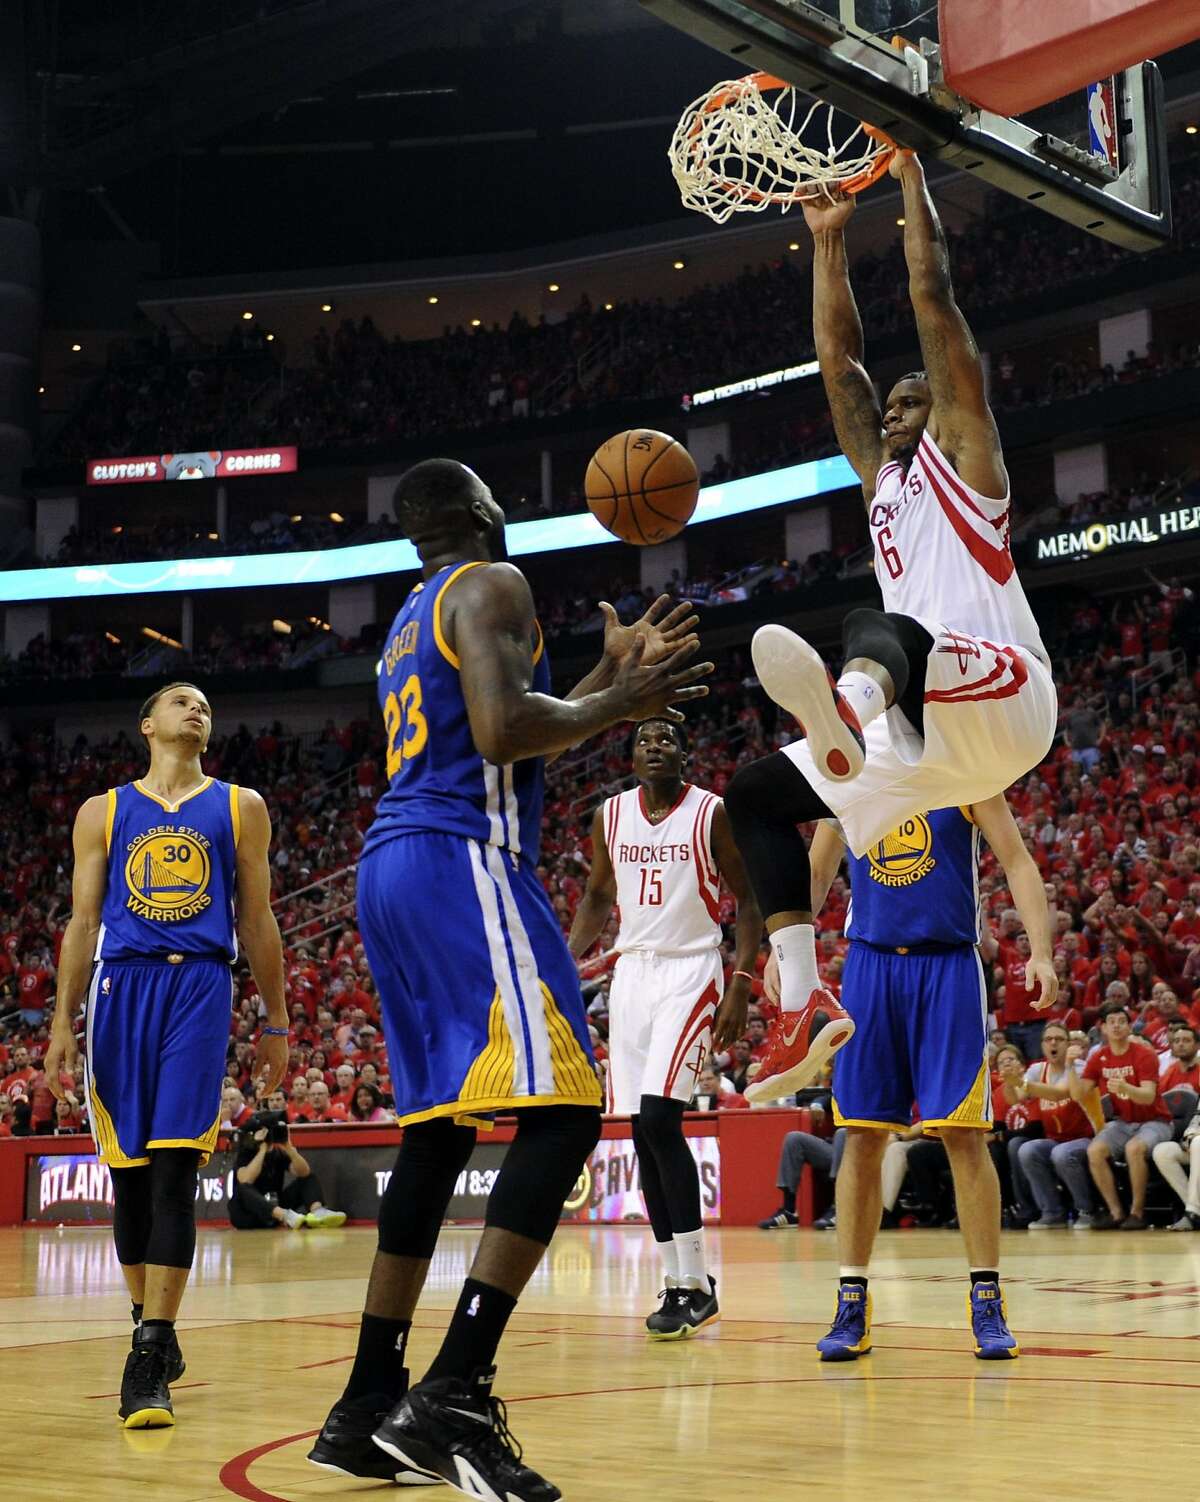 Houston Rockets forward Terrence Jones #6 slam dunks as Golden State Warriors forward Draymond Green #23 looks on in the third quarter of Game 4 of the Western Conference Finals, Monday, May 25, 2015, at Toyota Center in Houston, TX.